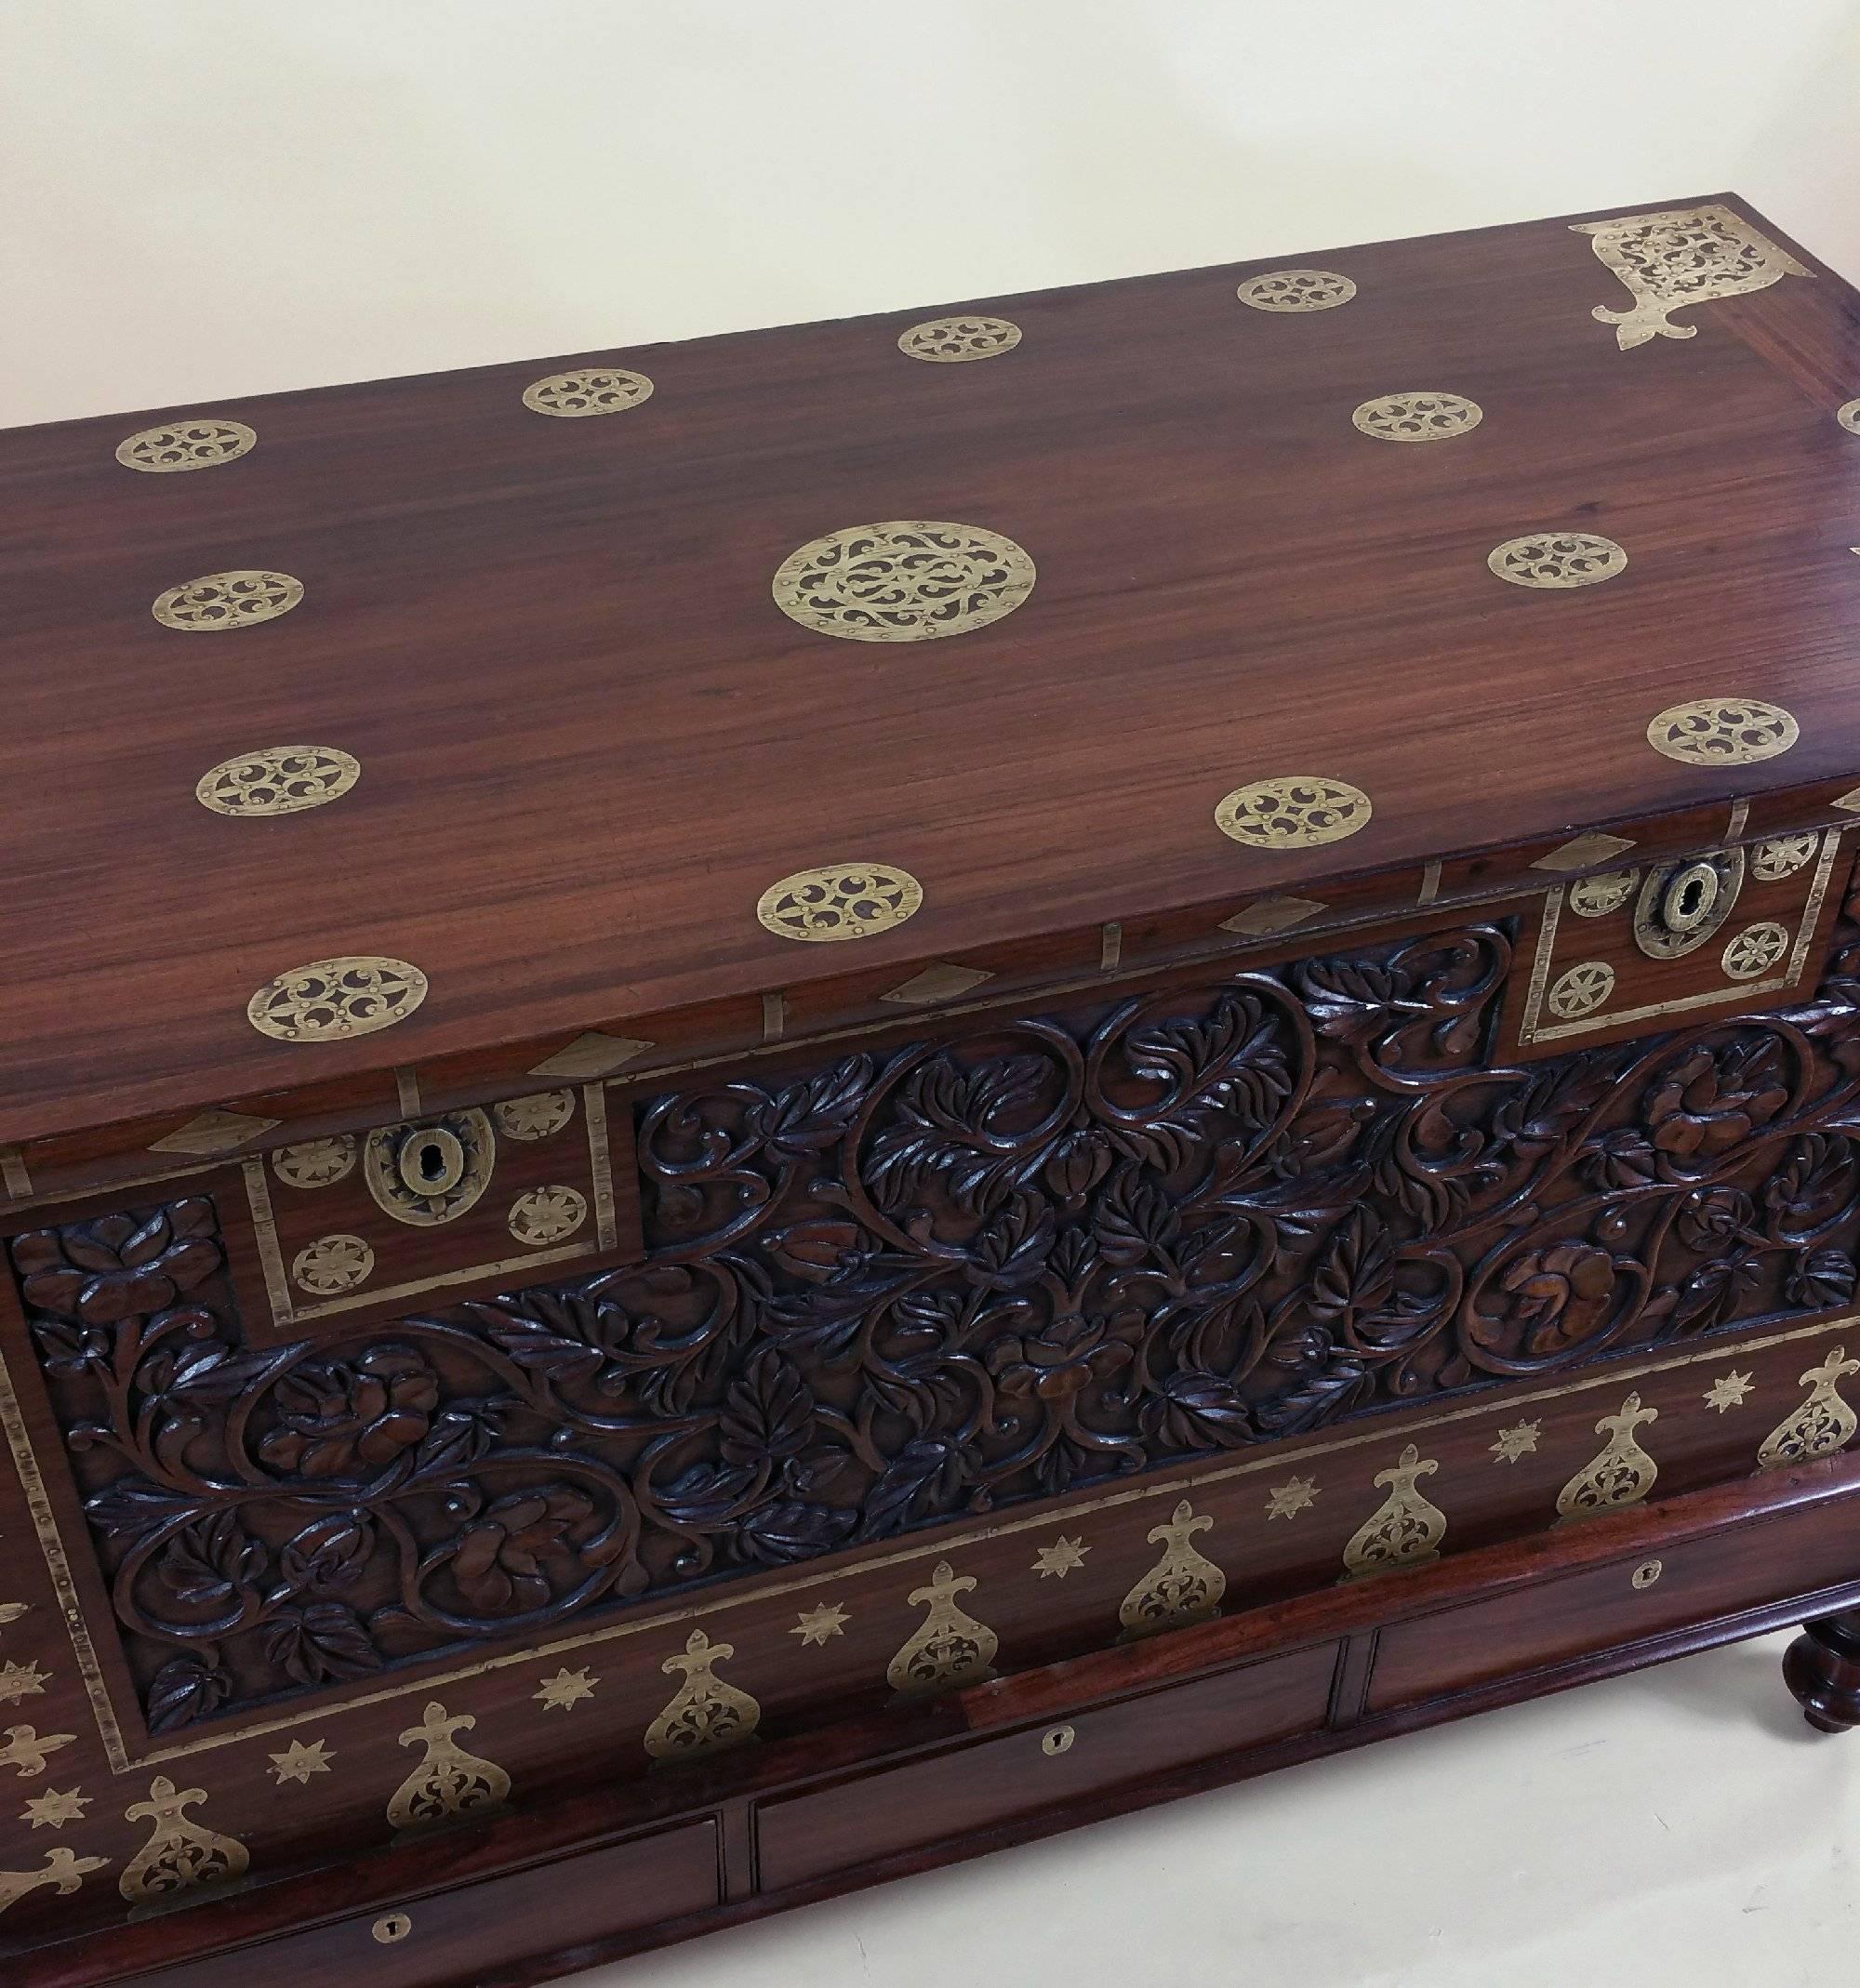 This superb zanzibar teak intricately carved chest features ornate brass mounts and three drawers to the base, with a key to the front and drawers. This beautifully designed chest features a series of inset brass medallions and patterns, with a